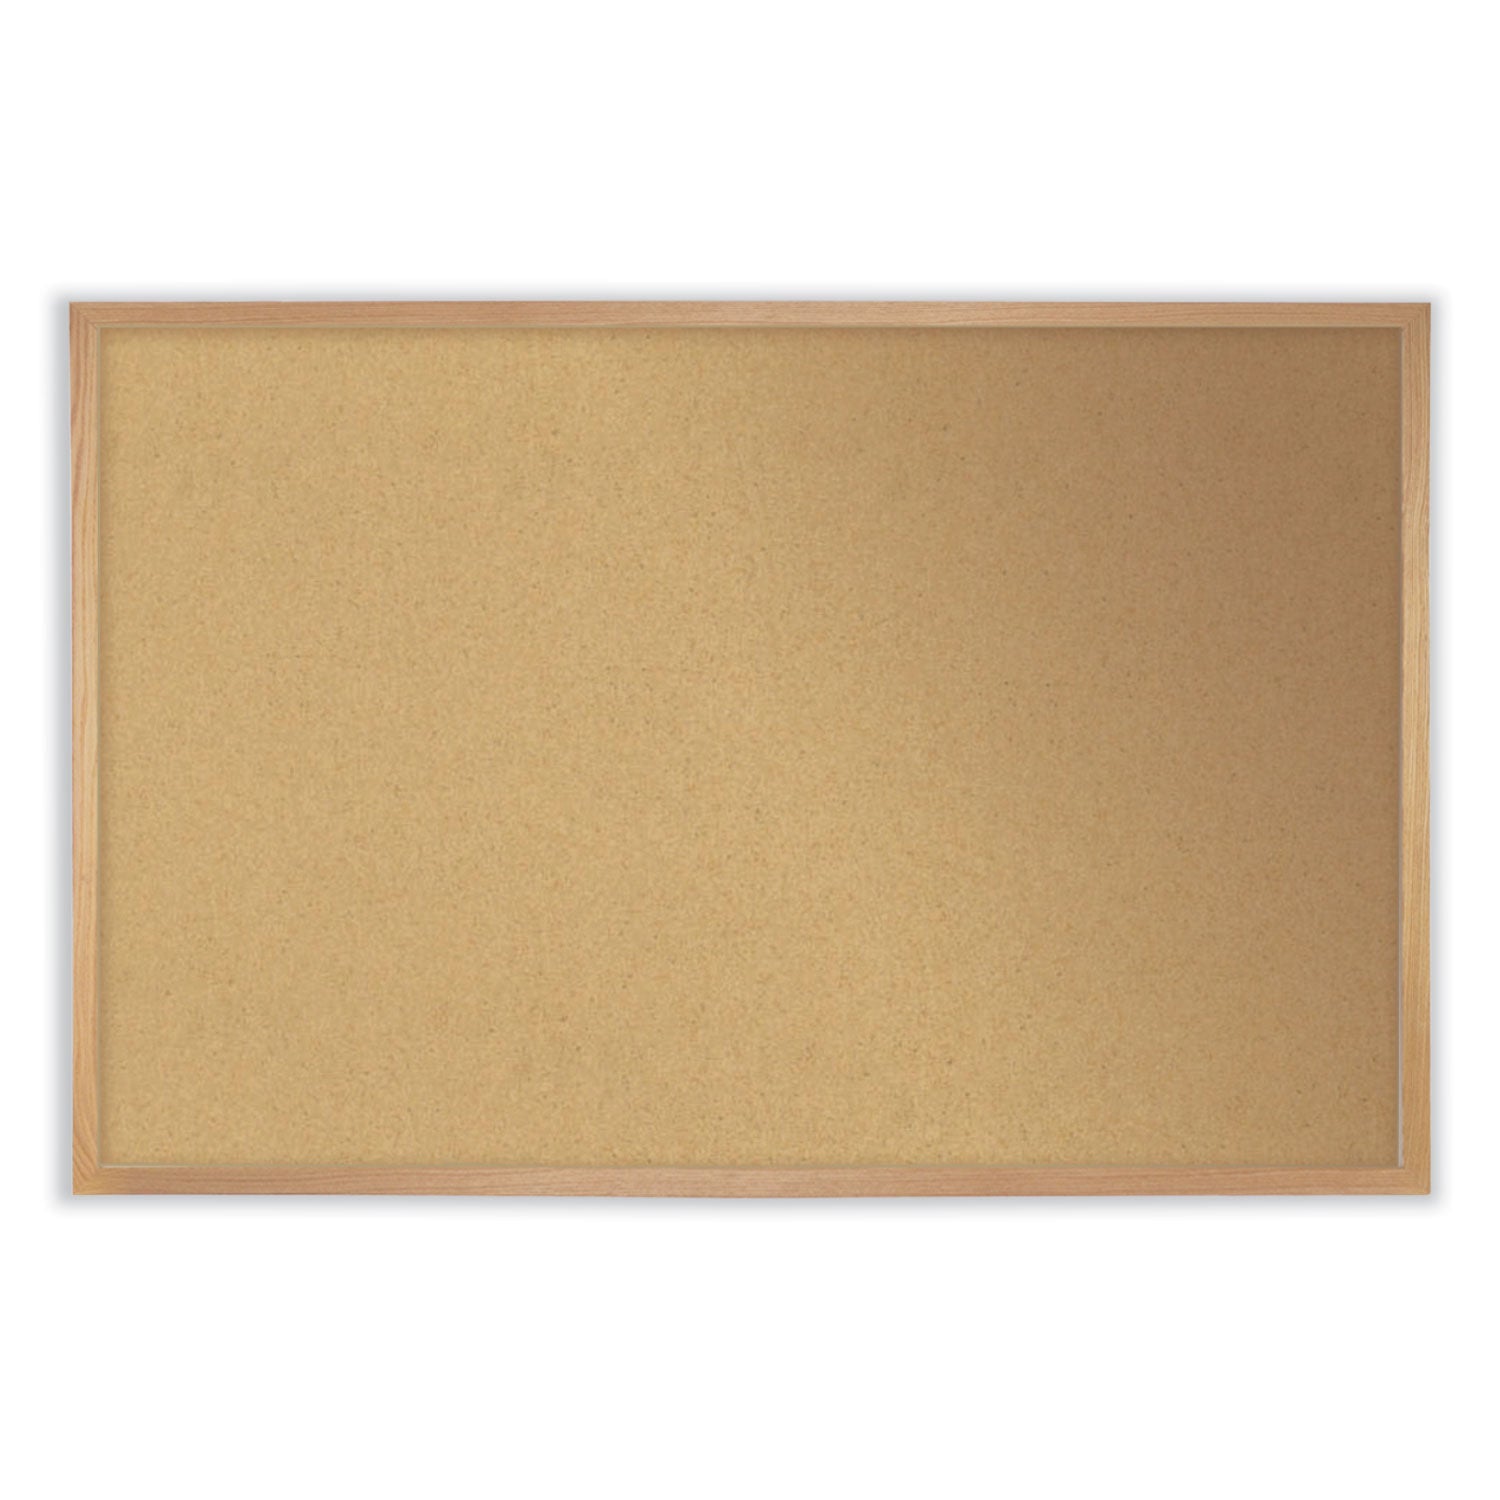 natural-cork-bulletin-board-with-frame-36-x-24-tan-surface-natural-oak-frame-ships-in-7-10-business-days_ghe14231 - 1